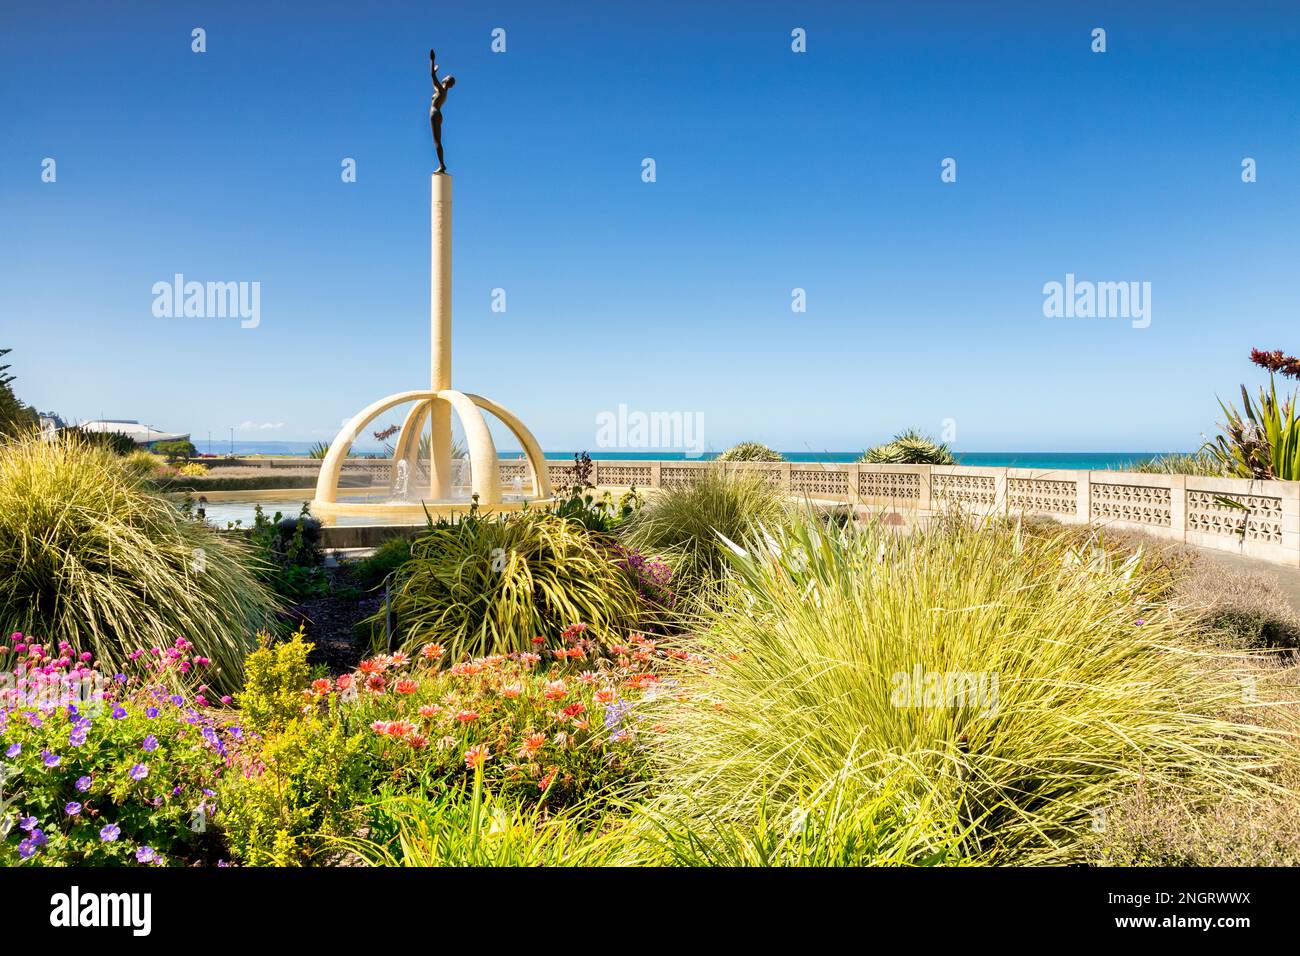 5 December 2022: Napier, Hawkes Bay, New Zealand - Pania of the Reef, sculpture on Marine Parade, set in a beautiful garden. Glorious summer weather. Stock Photo